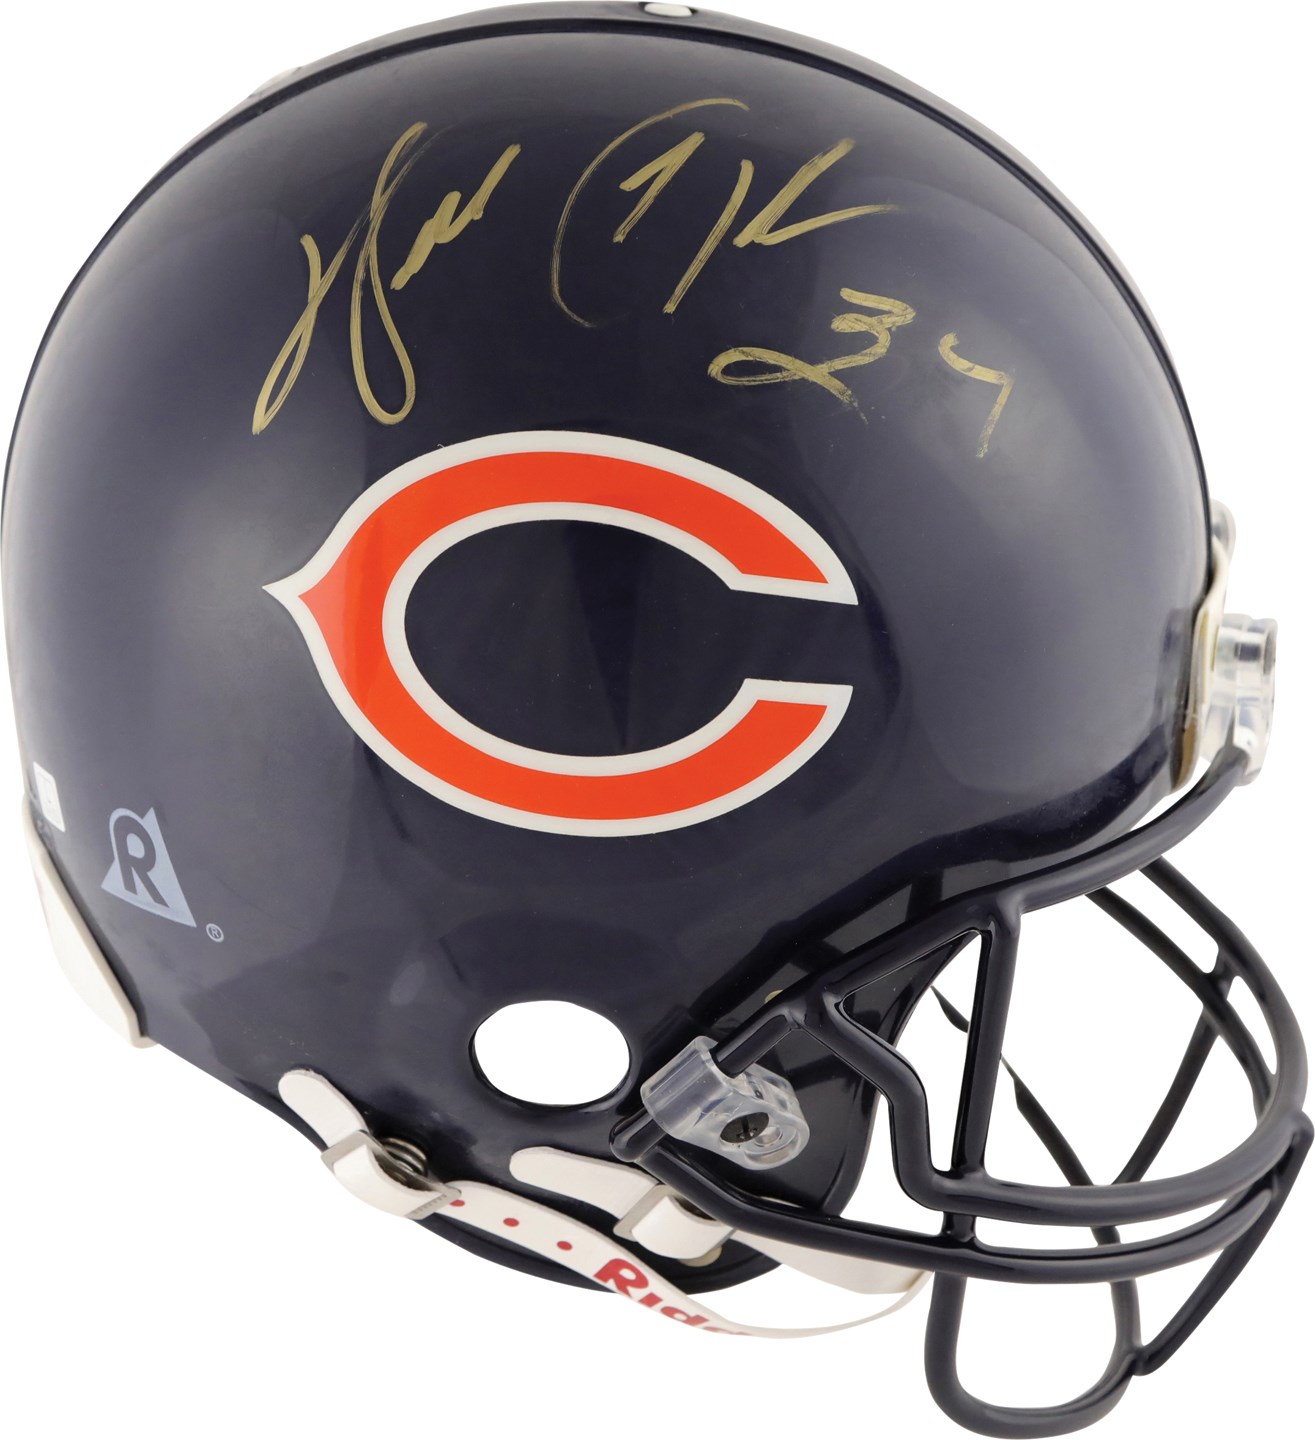 Rare 1999 Walter Payton Twice-Signed Chicago Bears Full Sized Helmet with Exact Proof of Signing! (PSA)